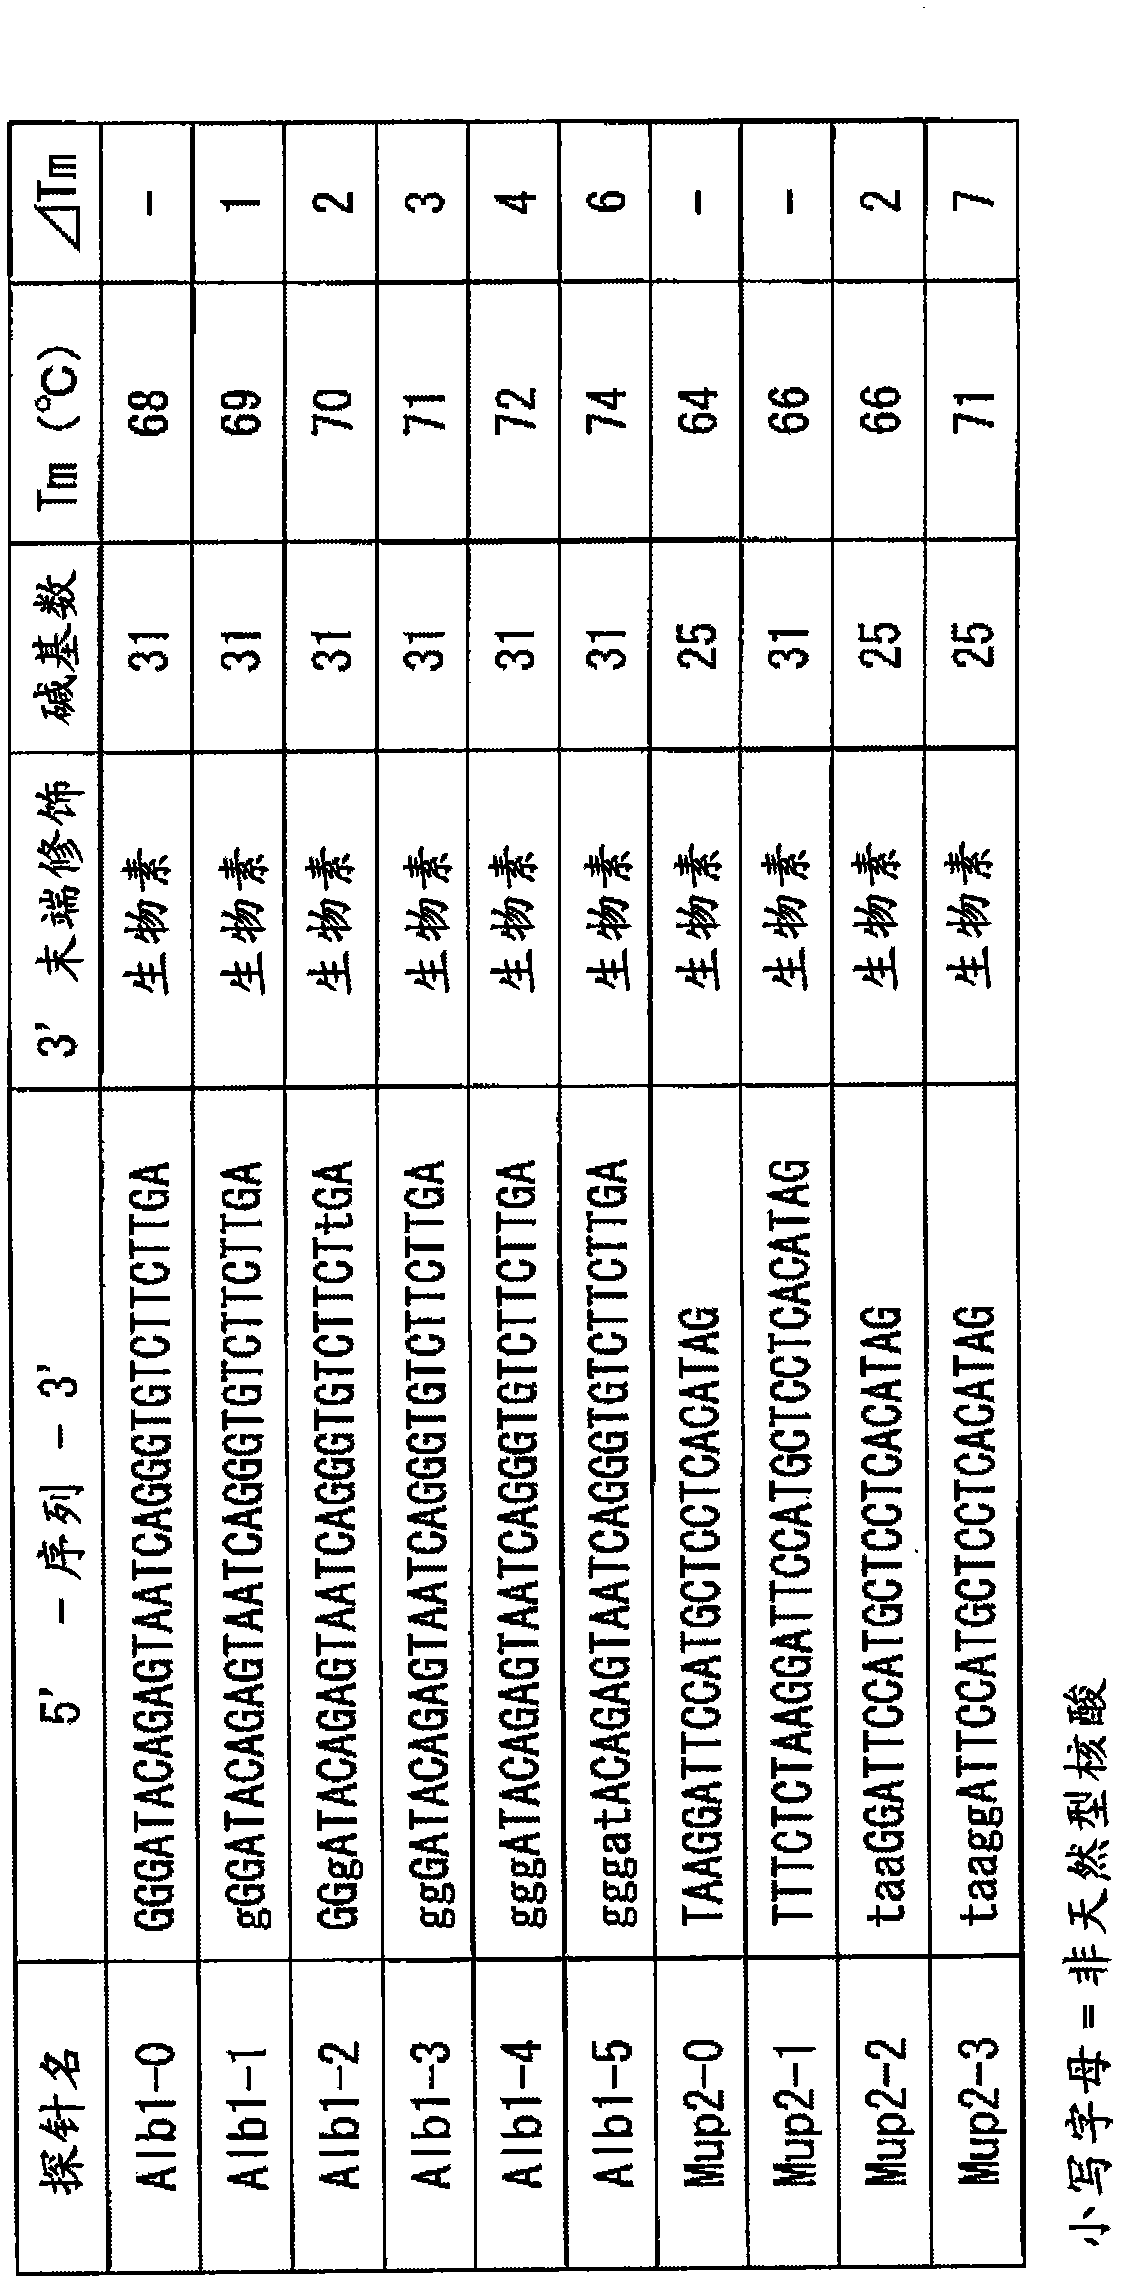 Method for production of cDNA library having reduced content of cDNA clone derived from highly expressed gene